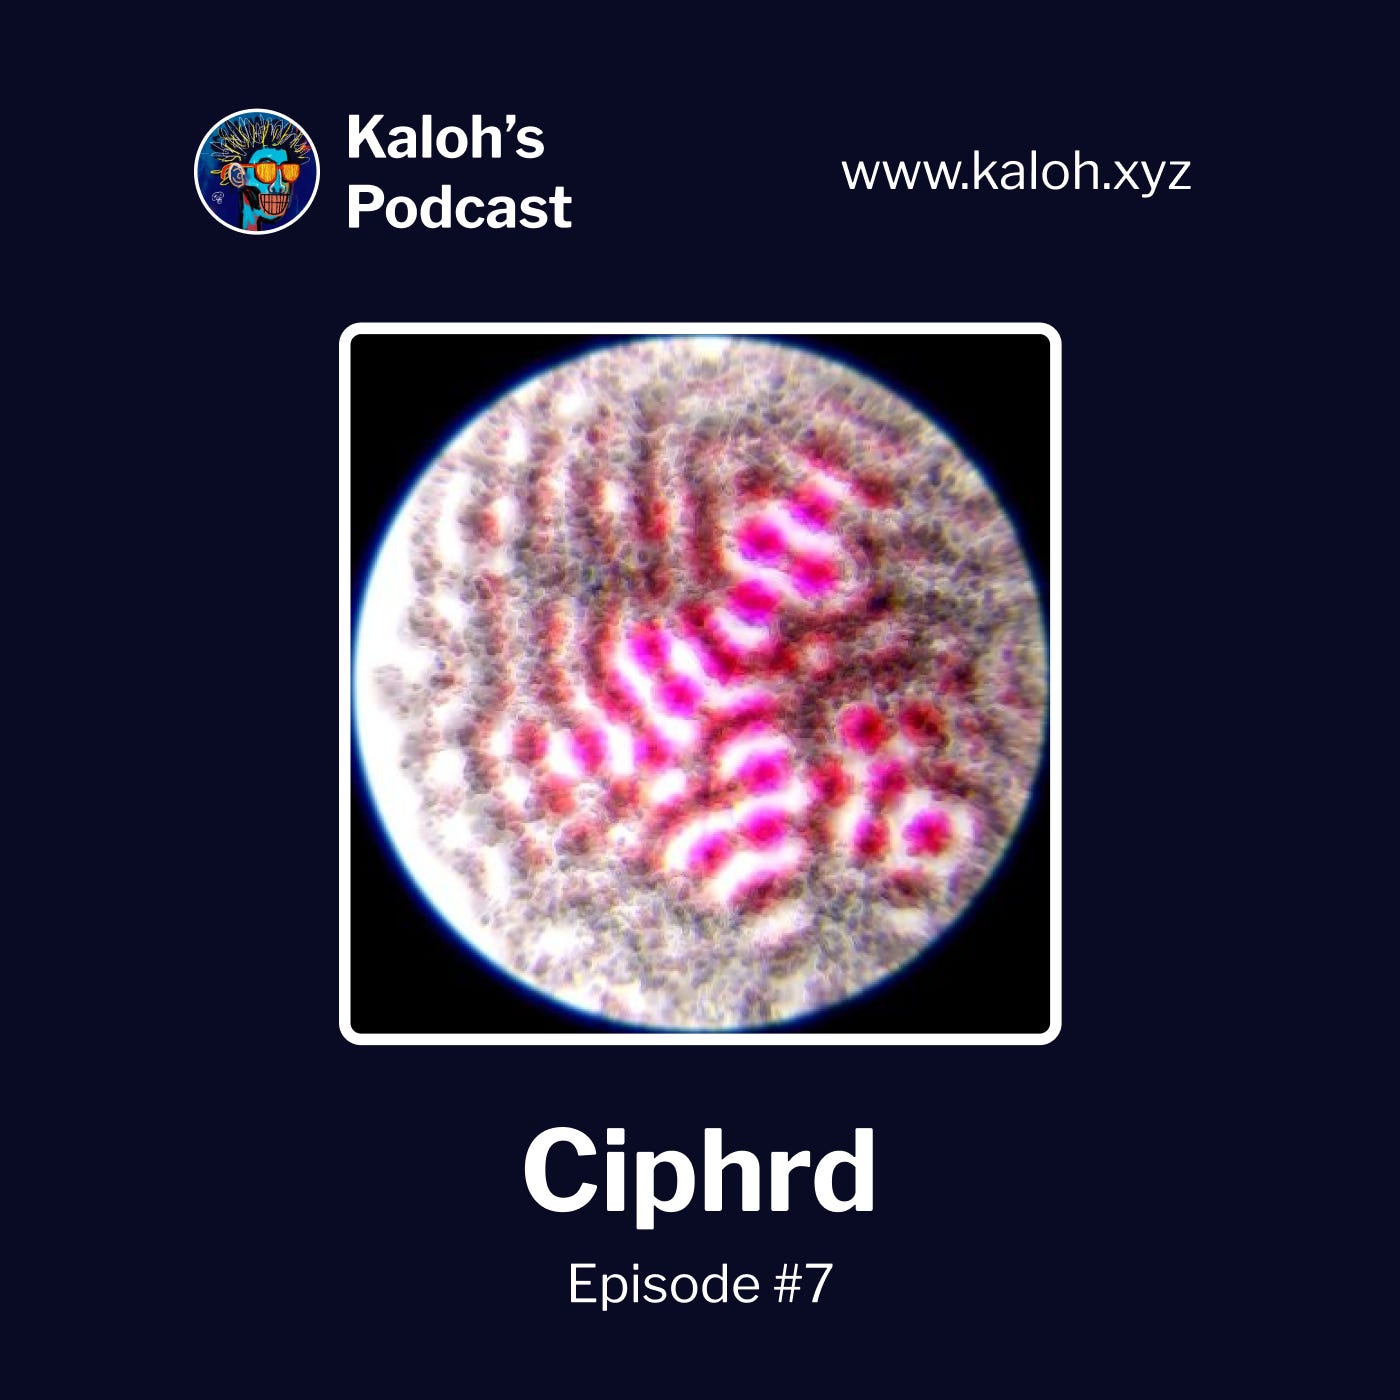 Kaloh’s Podcast Episode #7: Ciphrd is a generative artist and the founder of fxhash.